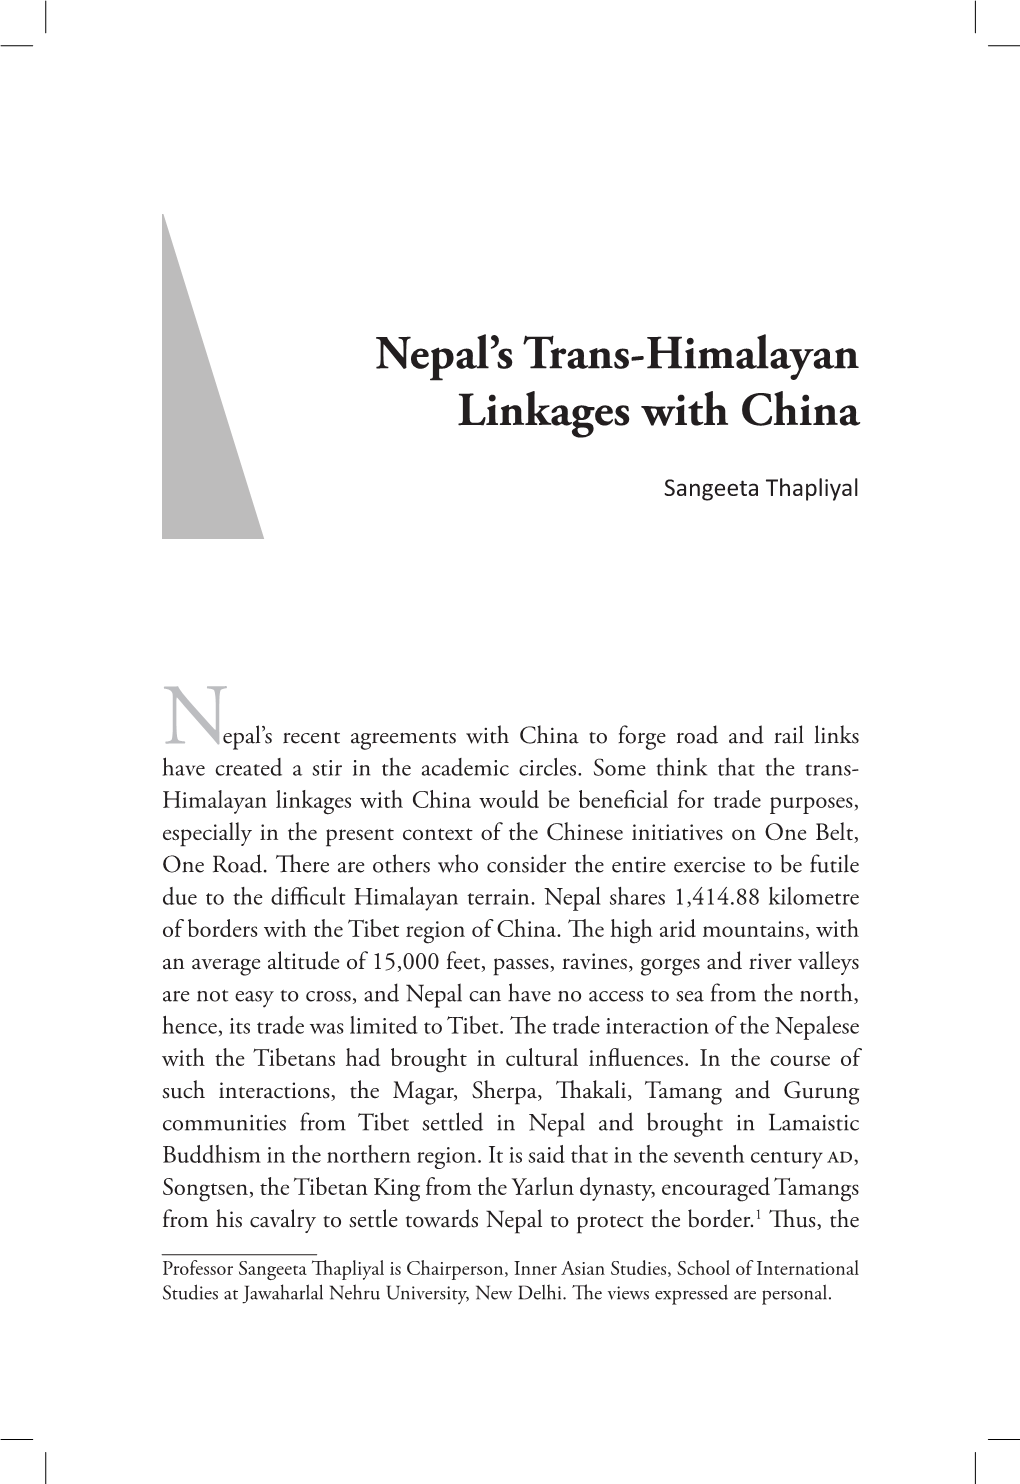 Nepal's Trans-Himalayan Linkages with China, by Sangeeta